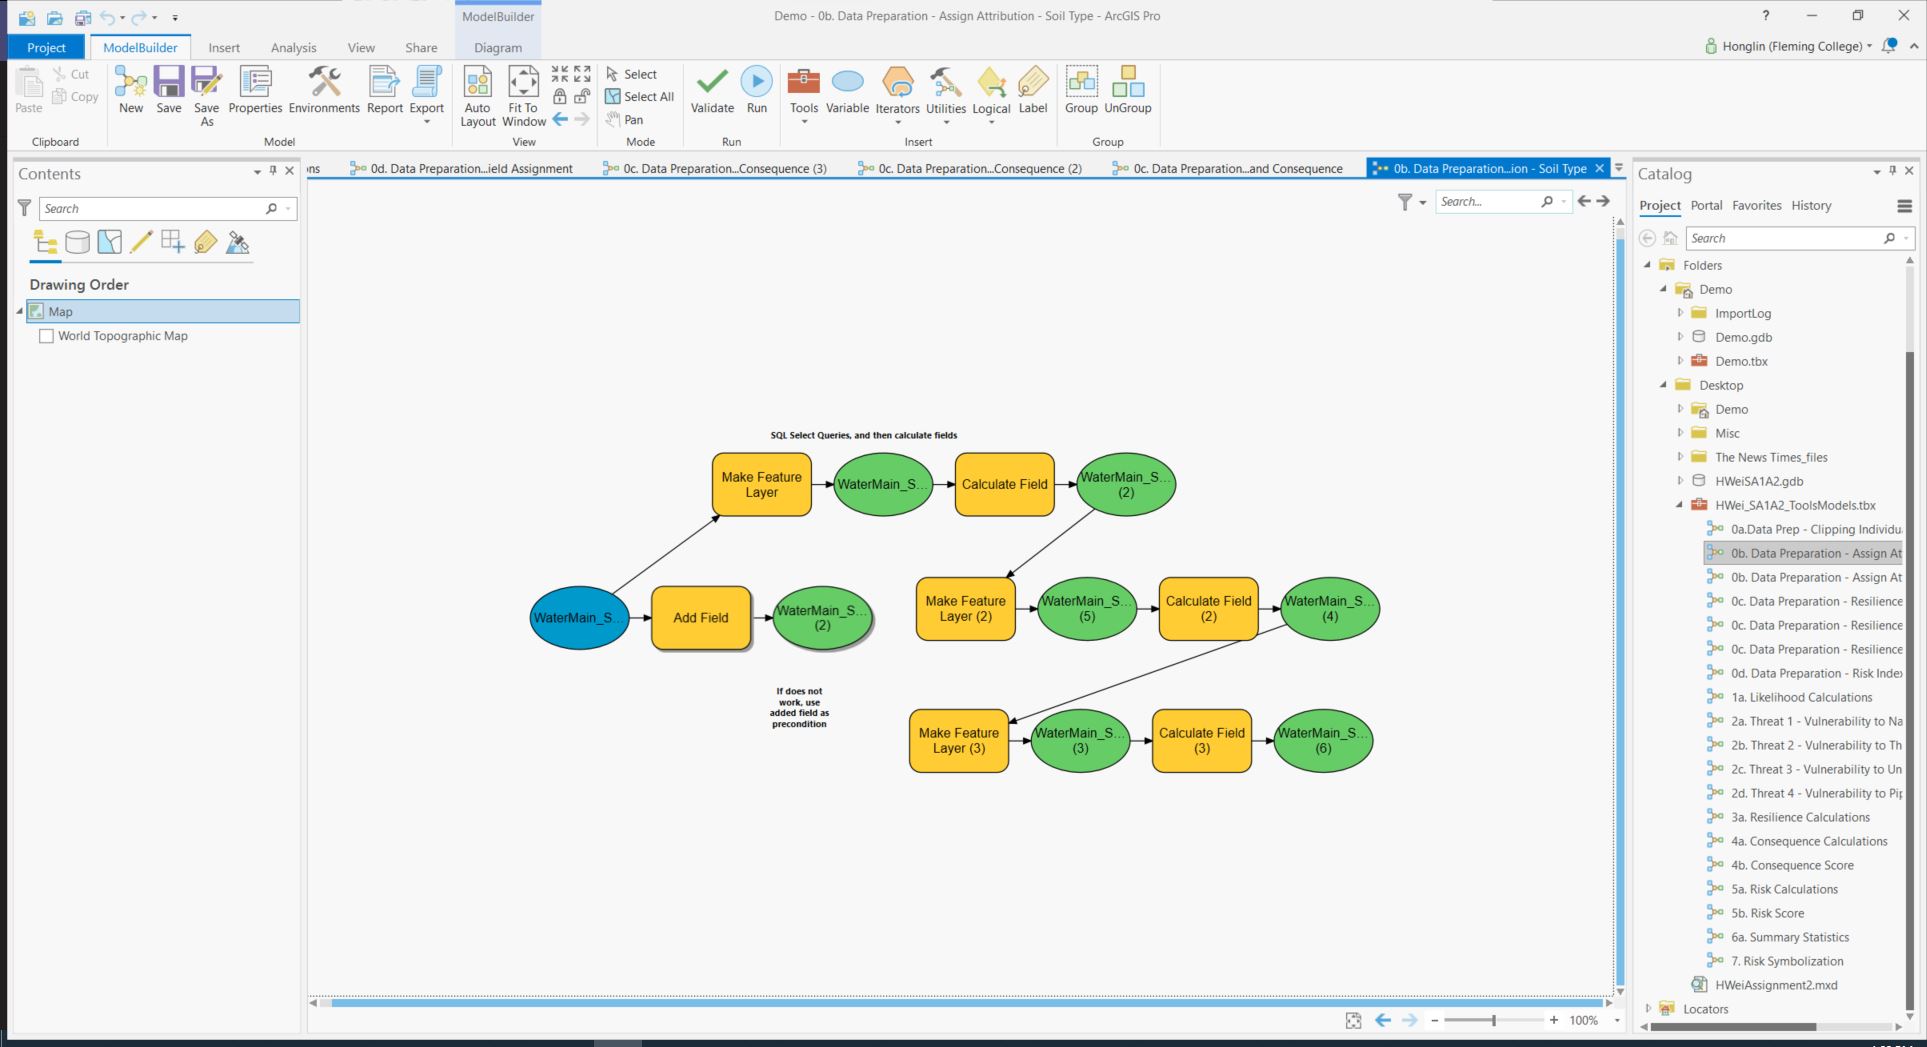 Preliminary Data Processing Using Model Builder & SQL in this water main assessment. Modelbuilder is an indispensable part of this project as it allows for process automation, reuse, and sharing among the GIS community.